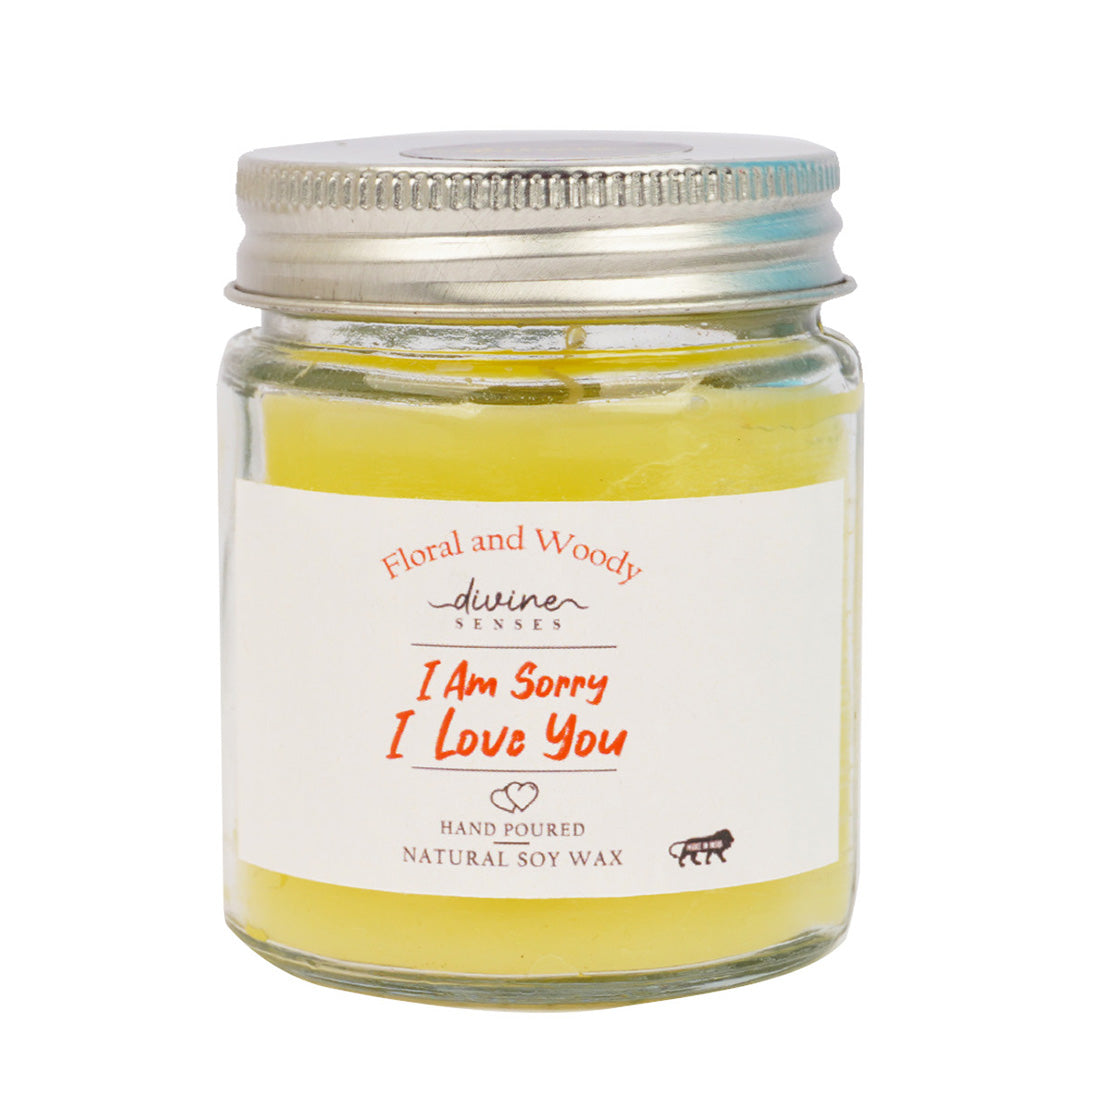 I Am Sorry, I Love You Scented Candle